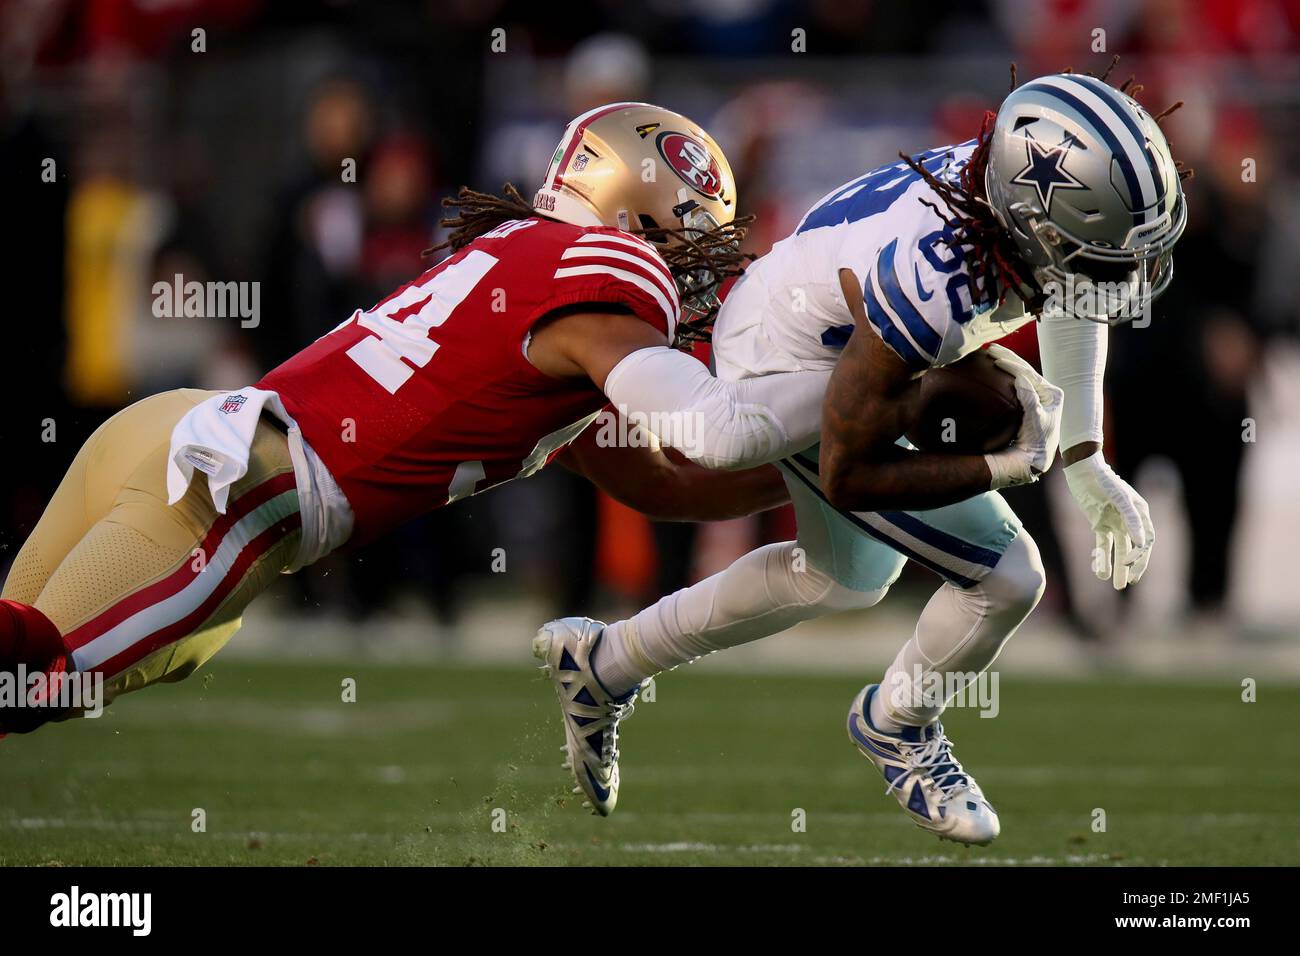 Former BYU linebacker Fred Warner grabs souvenir as 49ers bounce Cowboys  from NFL playoffs